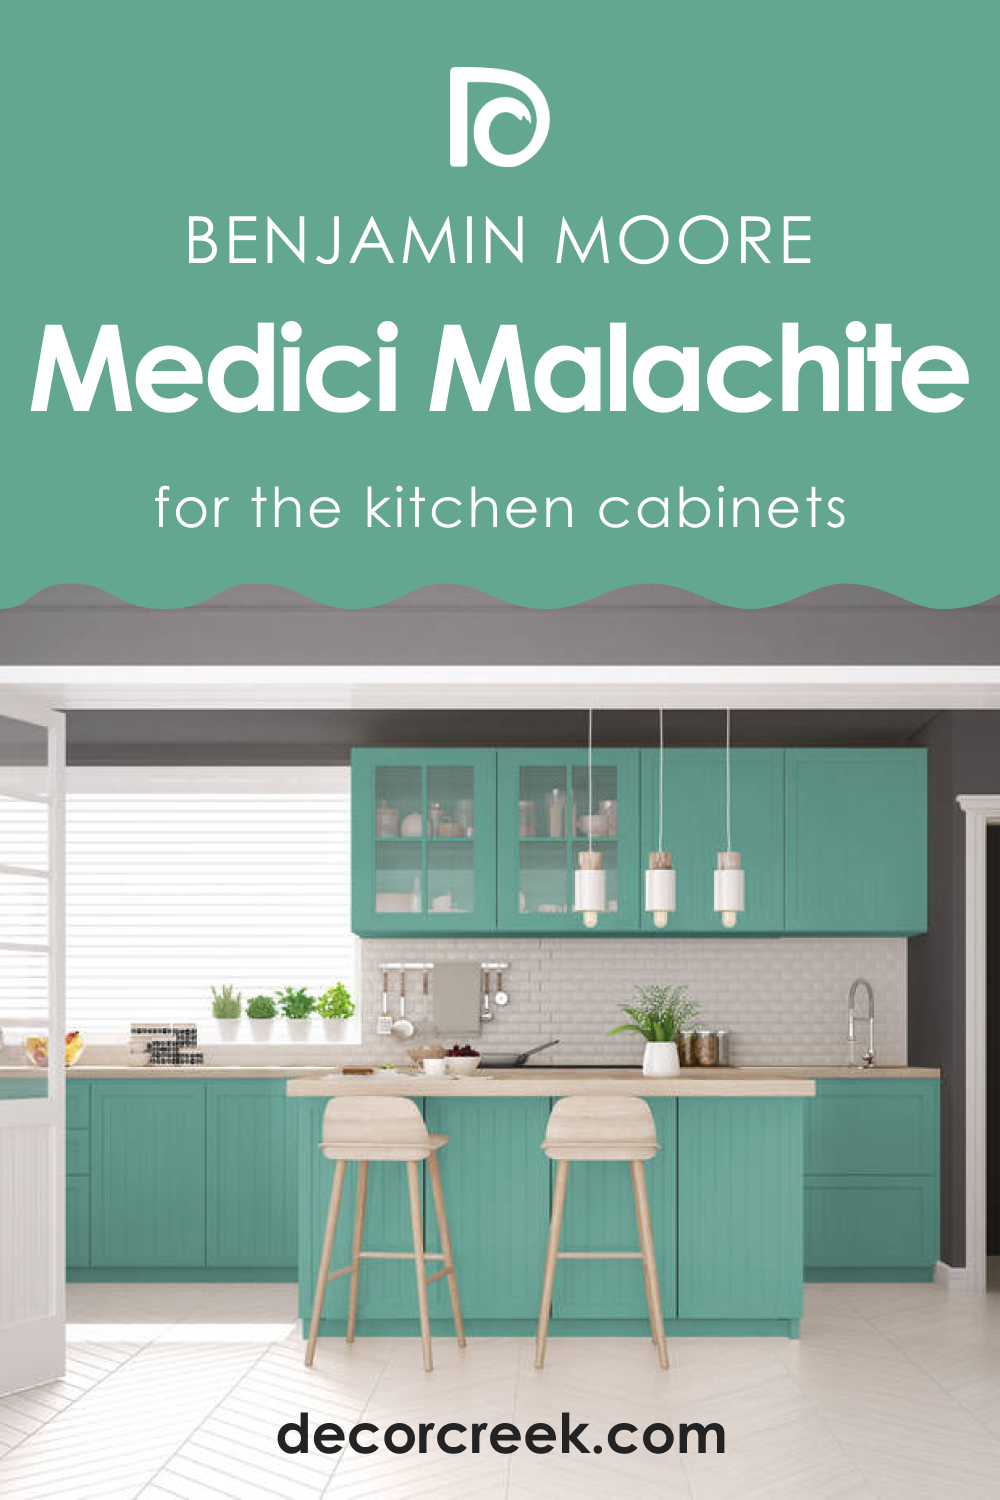 How to Use Medici Malachite 600 on the Kitchen Cabinets?